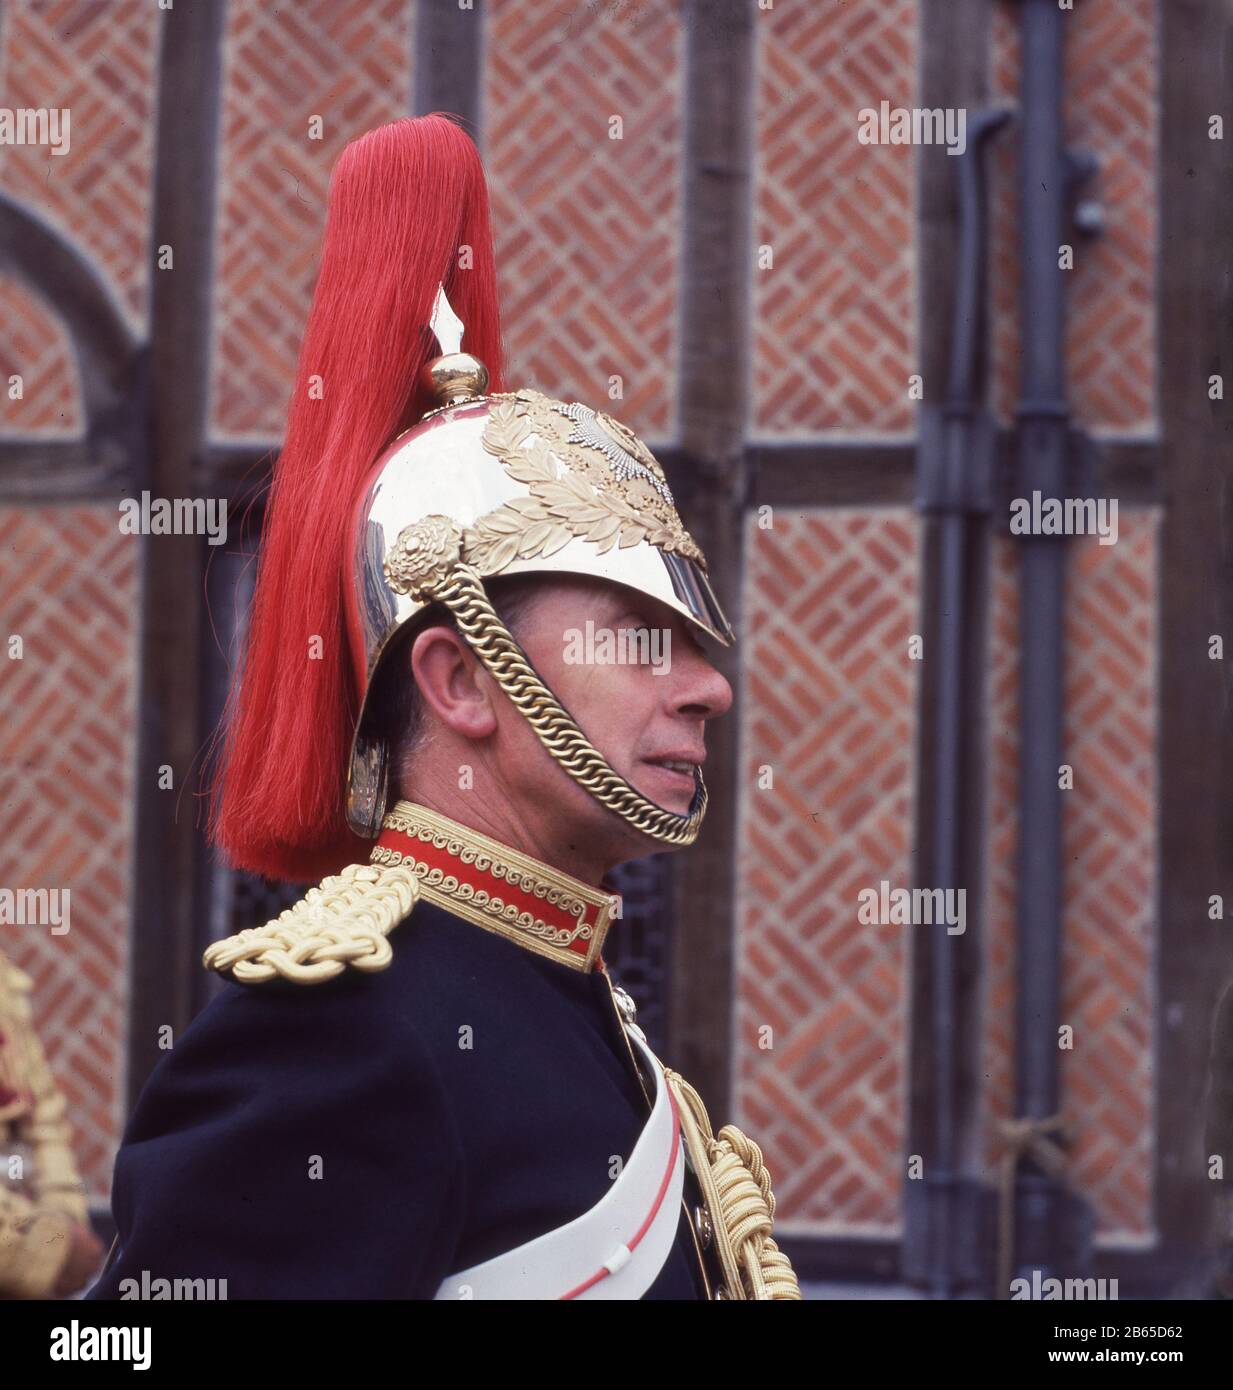 1960s, historical, close-up of the face and polished steel and gold helmet of a British Horse Guardsman, Windsor Castle, Windsor & Eton, Berkshire, England, UK, a member of the Royal Regiment of Horse Guards, known as the Blues, a cavalry regiment of the British Army, part of the Household Cavalry. The Blues merged with another regiment, the Royal Dragoons in 1969. Stock Photo